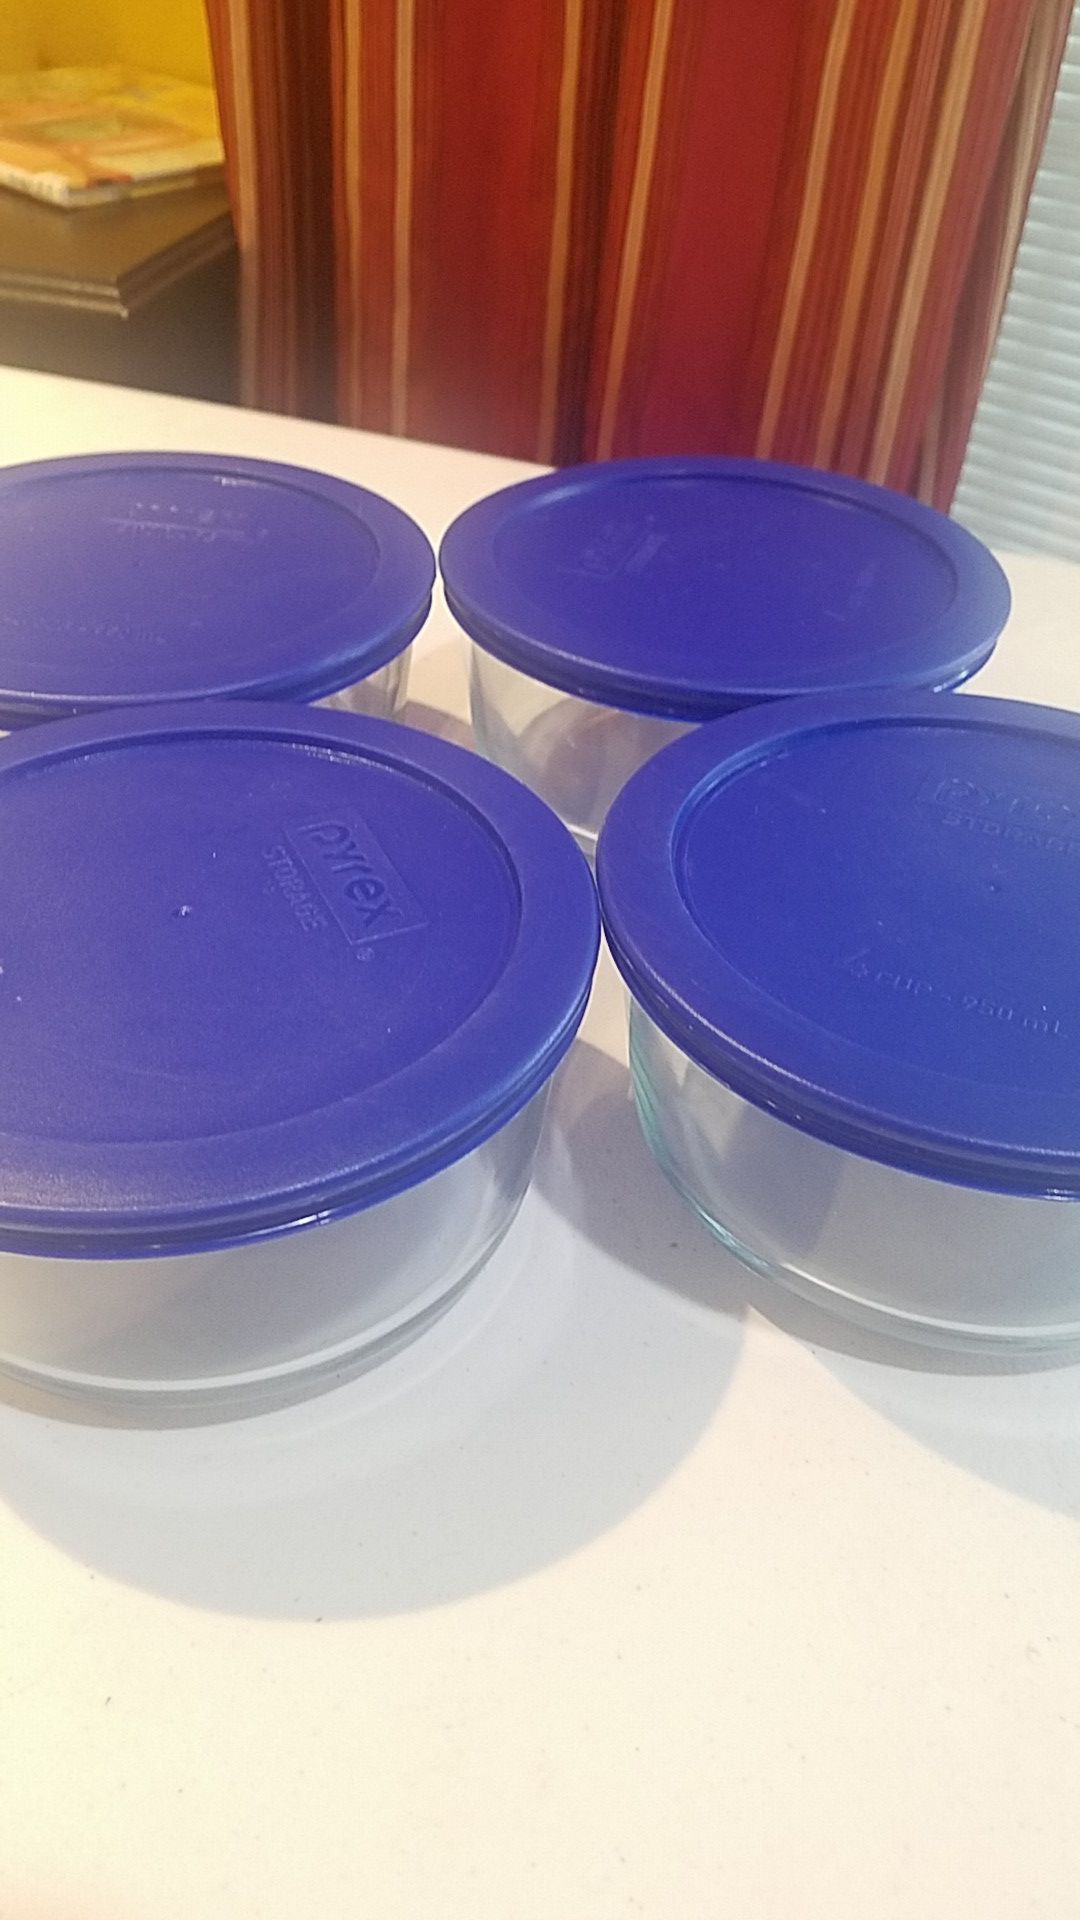 4x Pyrex glass storage containers with lids. 4 cups size. LIKE NEW